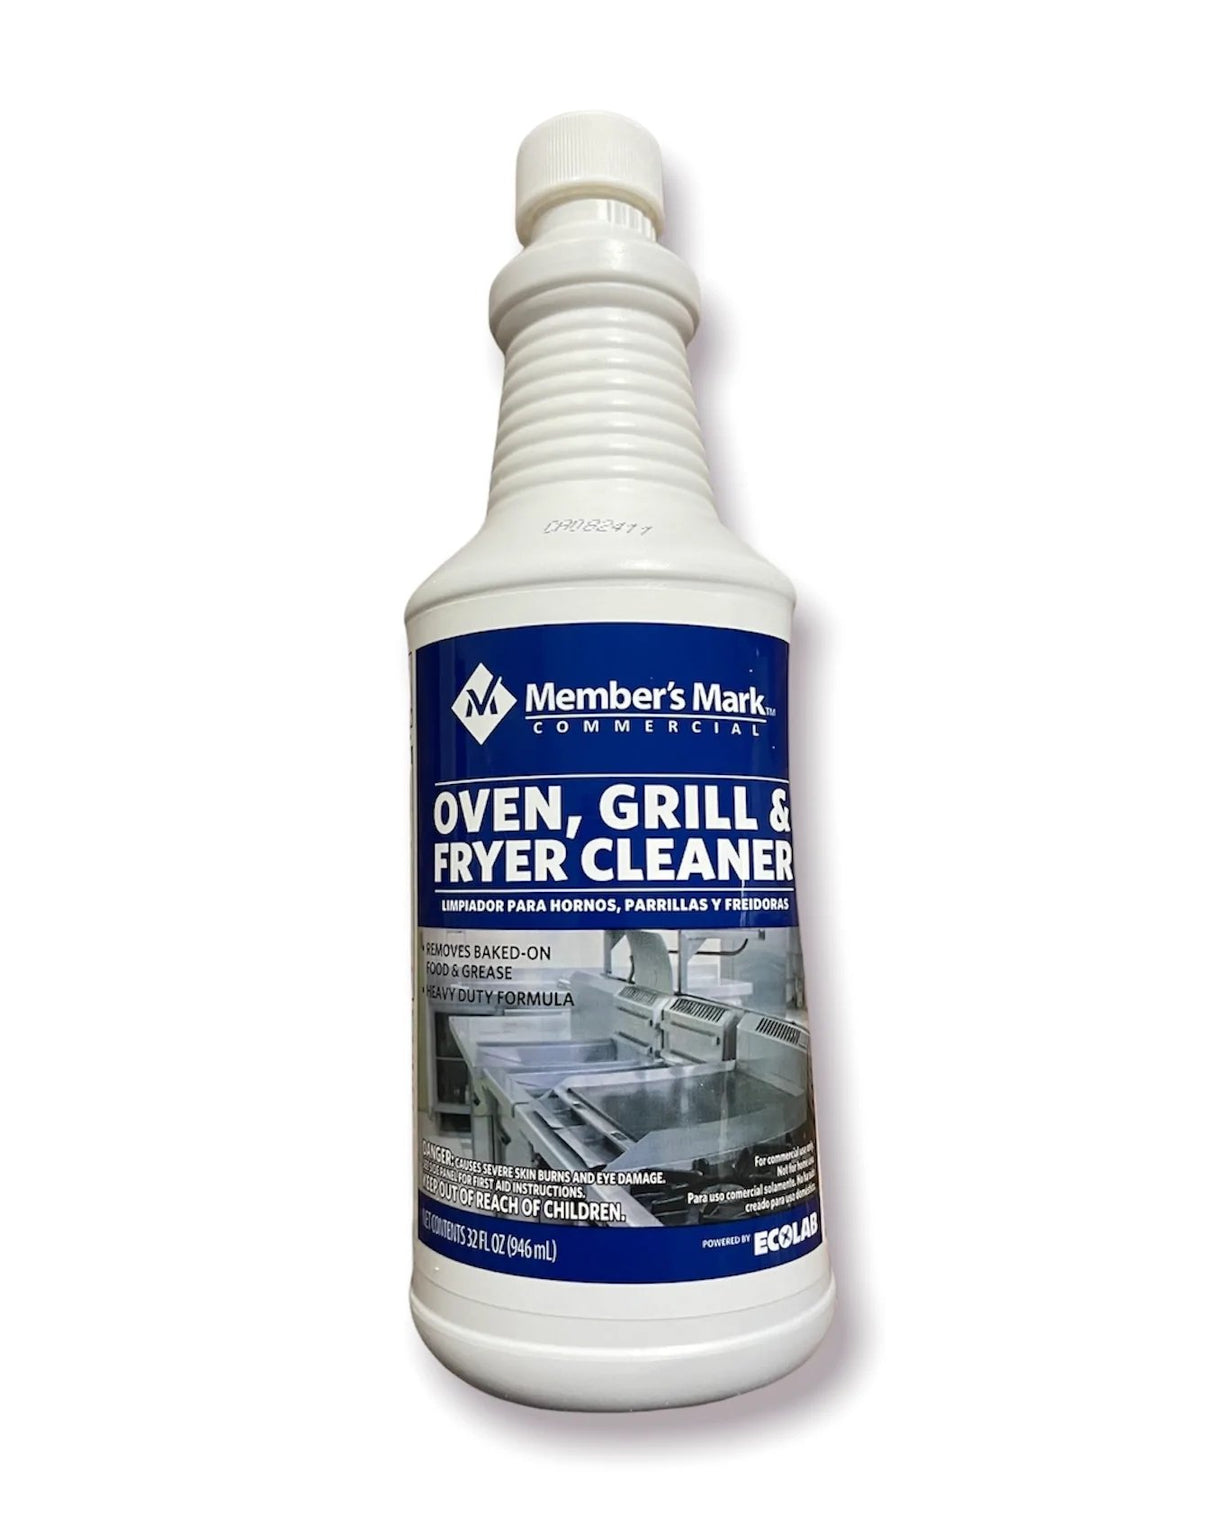 Oven & Grill Cleaner